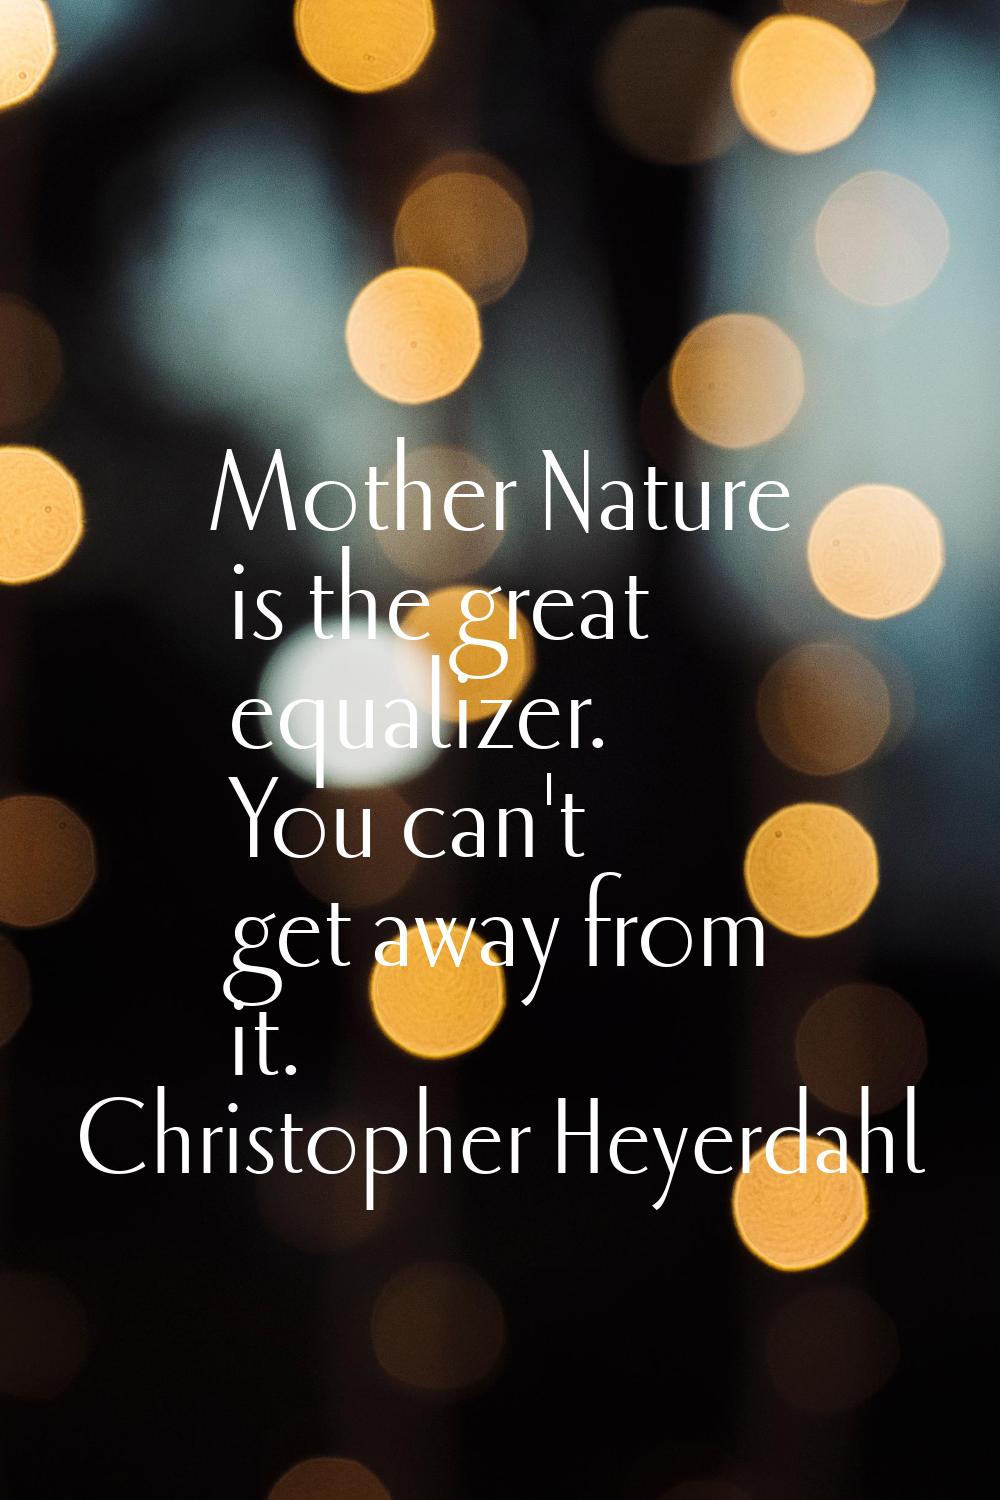 Mother Nature is the great equalizer. You can't get away from it.